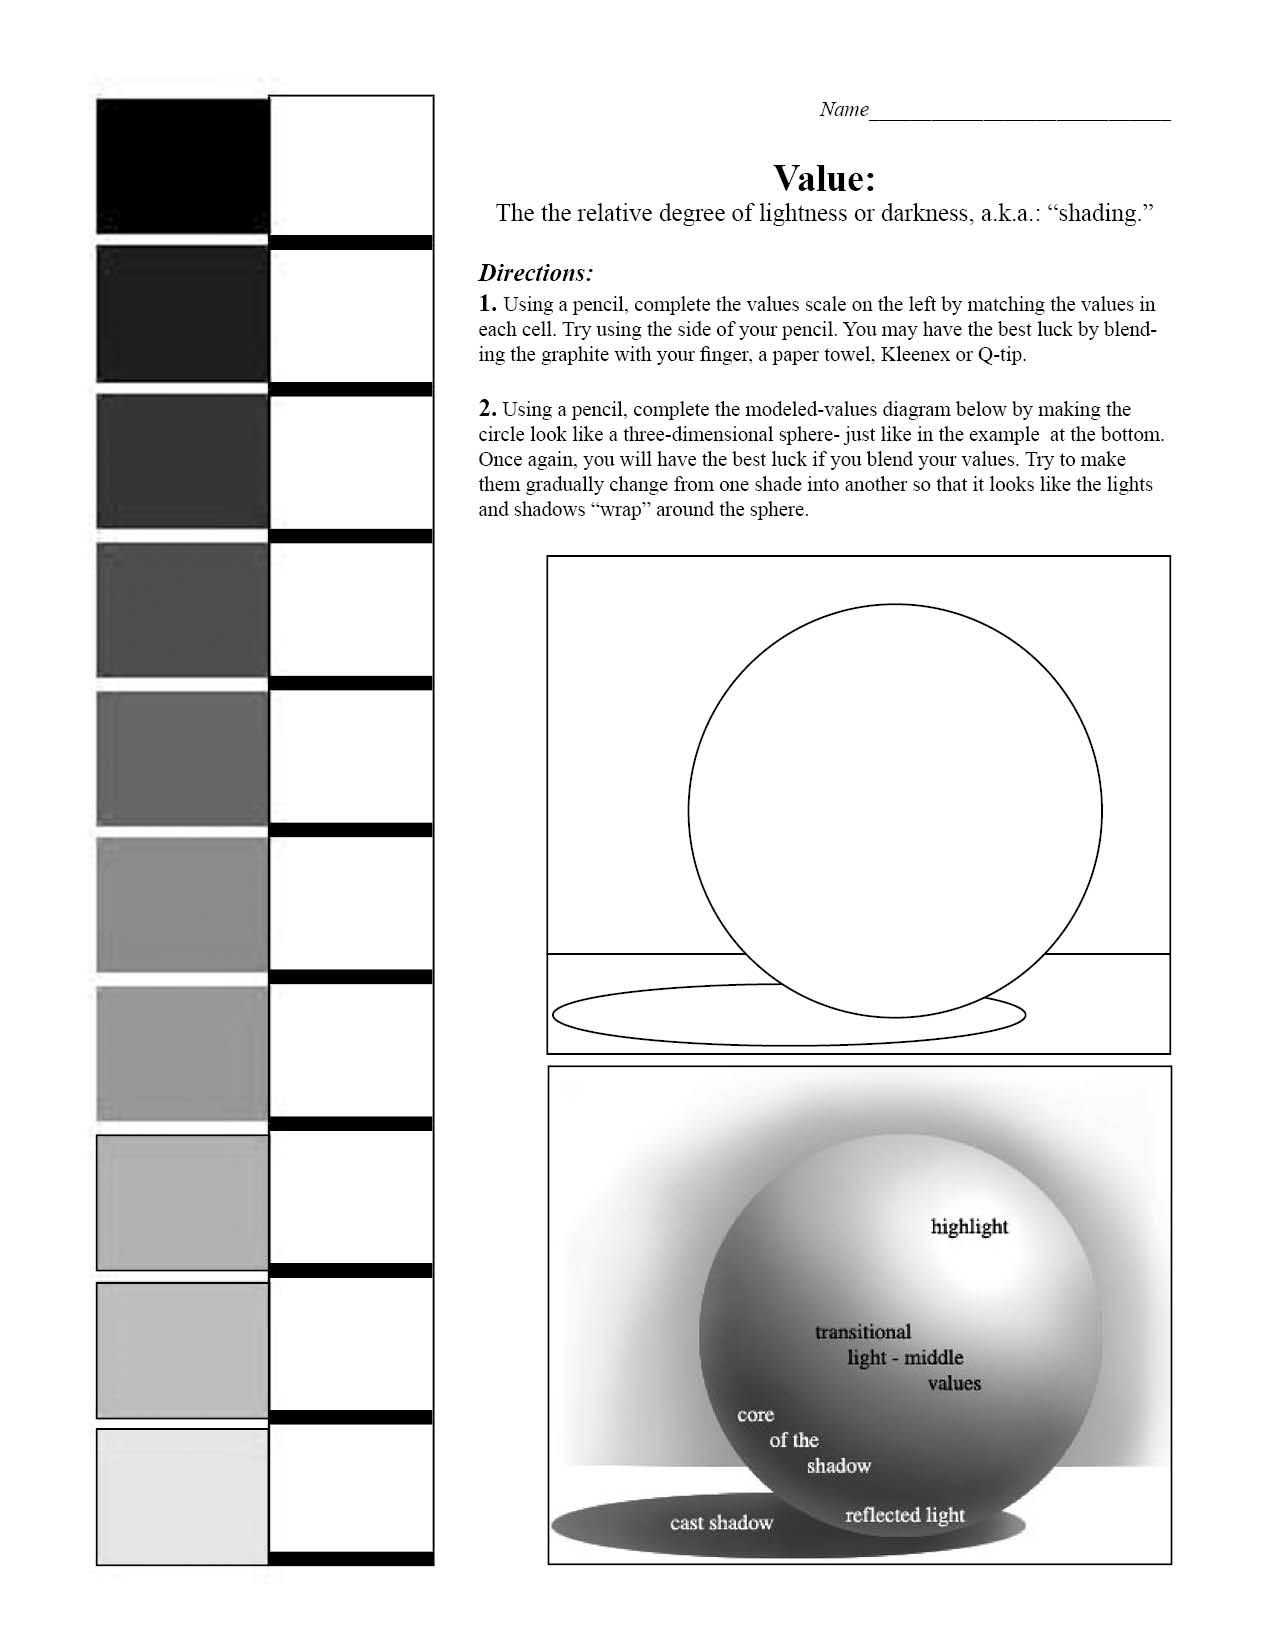 Volume Of Cones Cylinders and Spheres Worksheet Answers Also Value Scale and Sphere Worksheet 7th Grade Art Blending Value